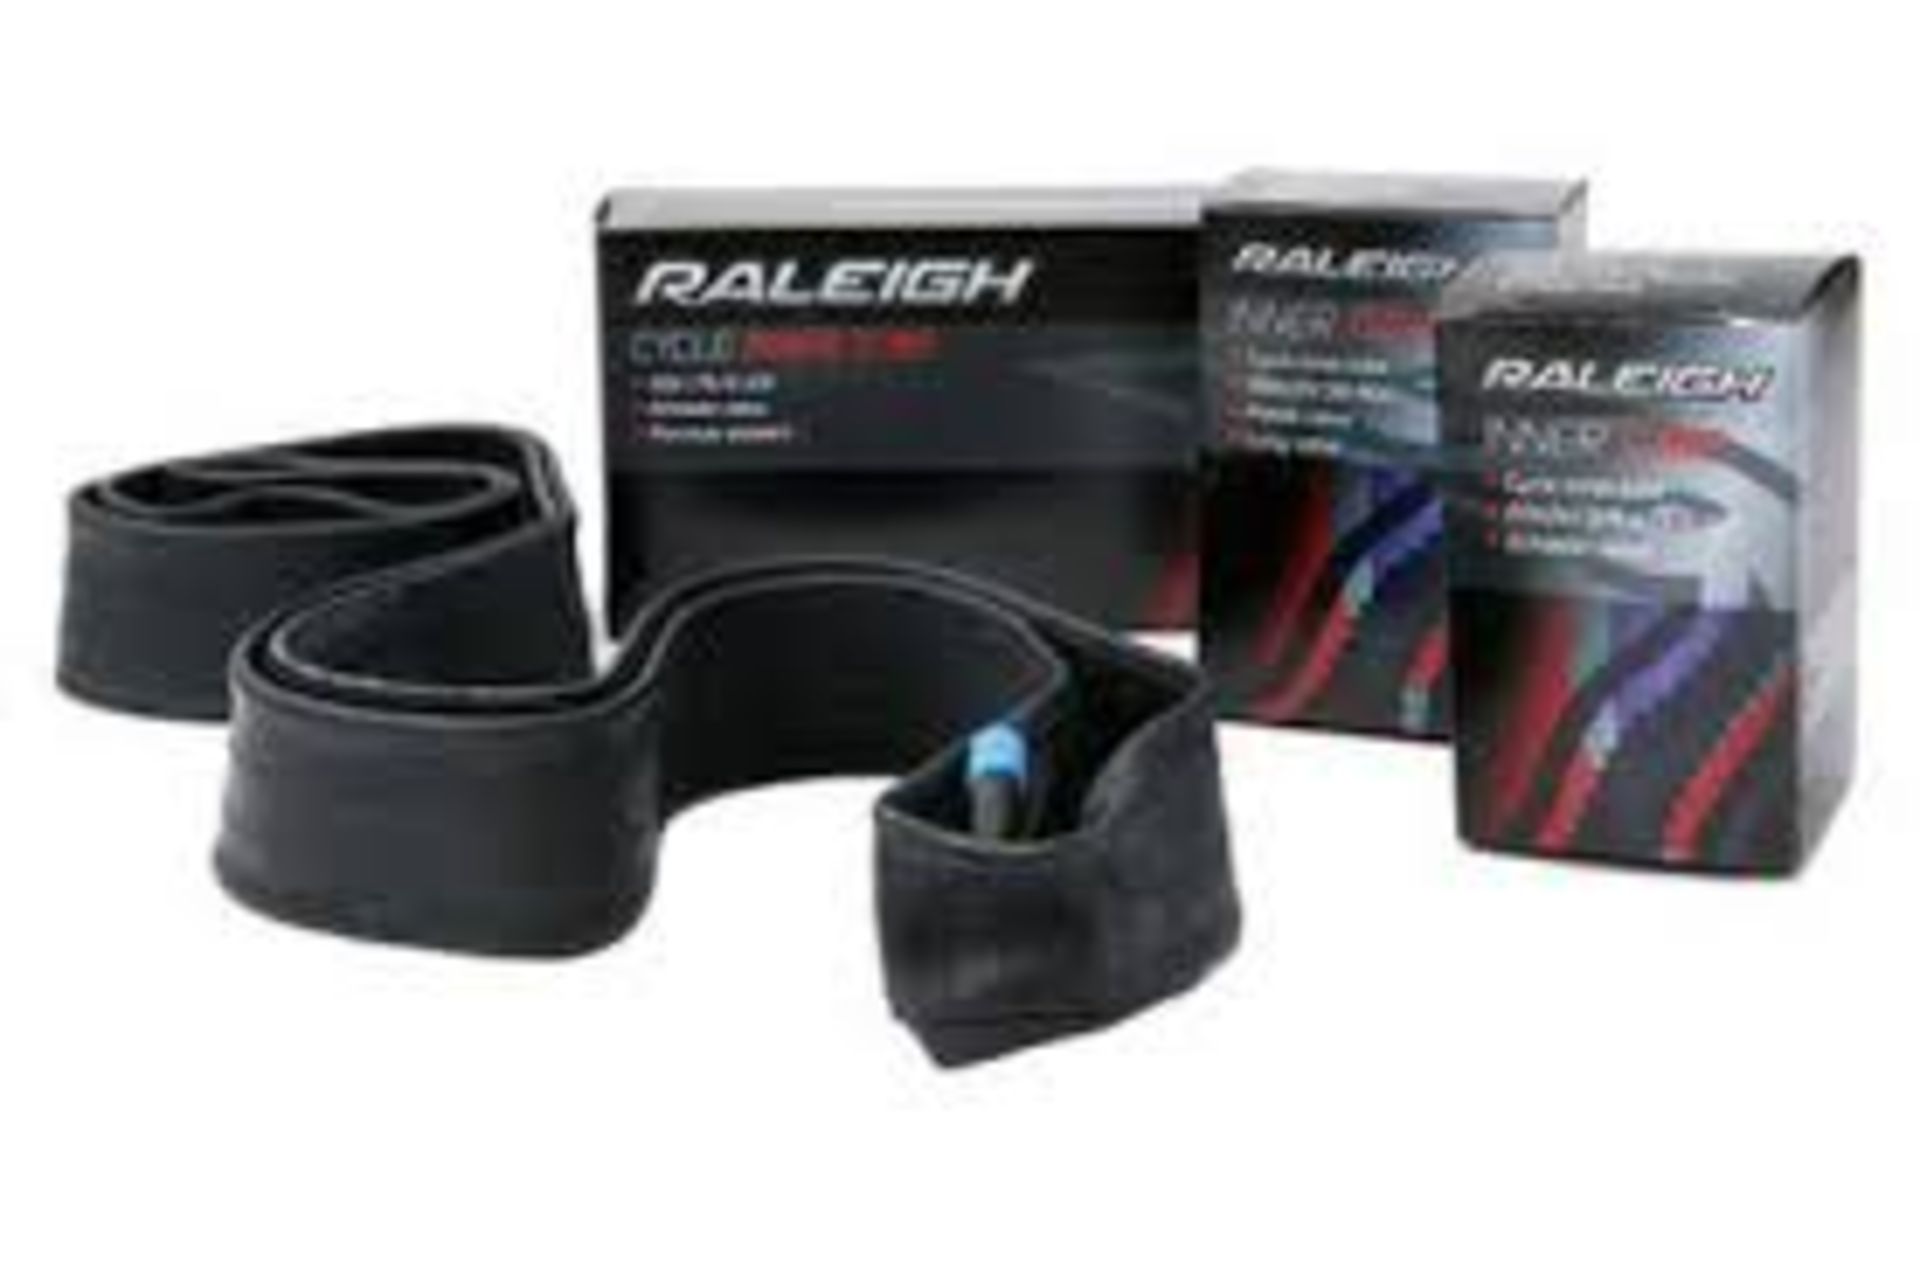 No VAT Brand New Two Raleigh Inner tubes 26 x 1.50-2.125 for adult mountain bike - Image 2 of 2